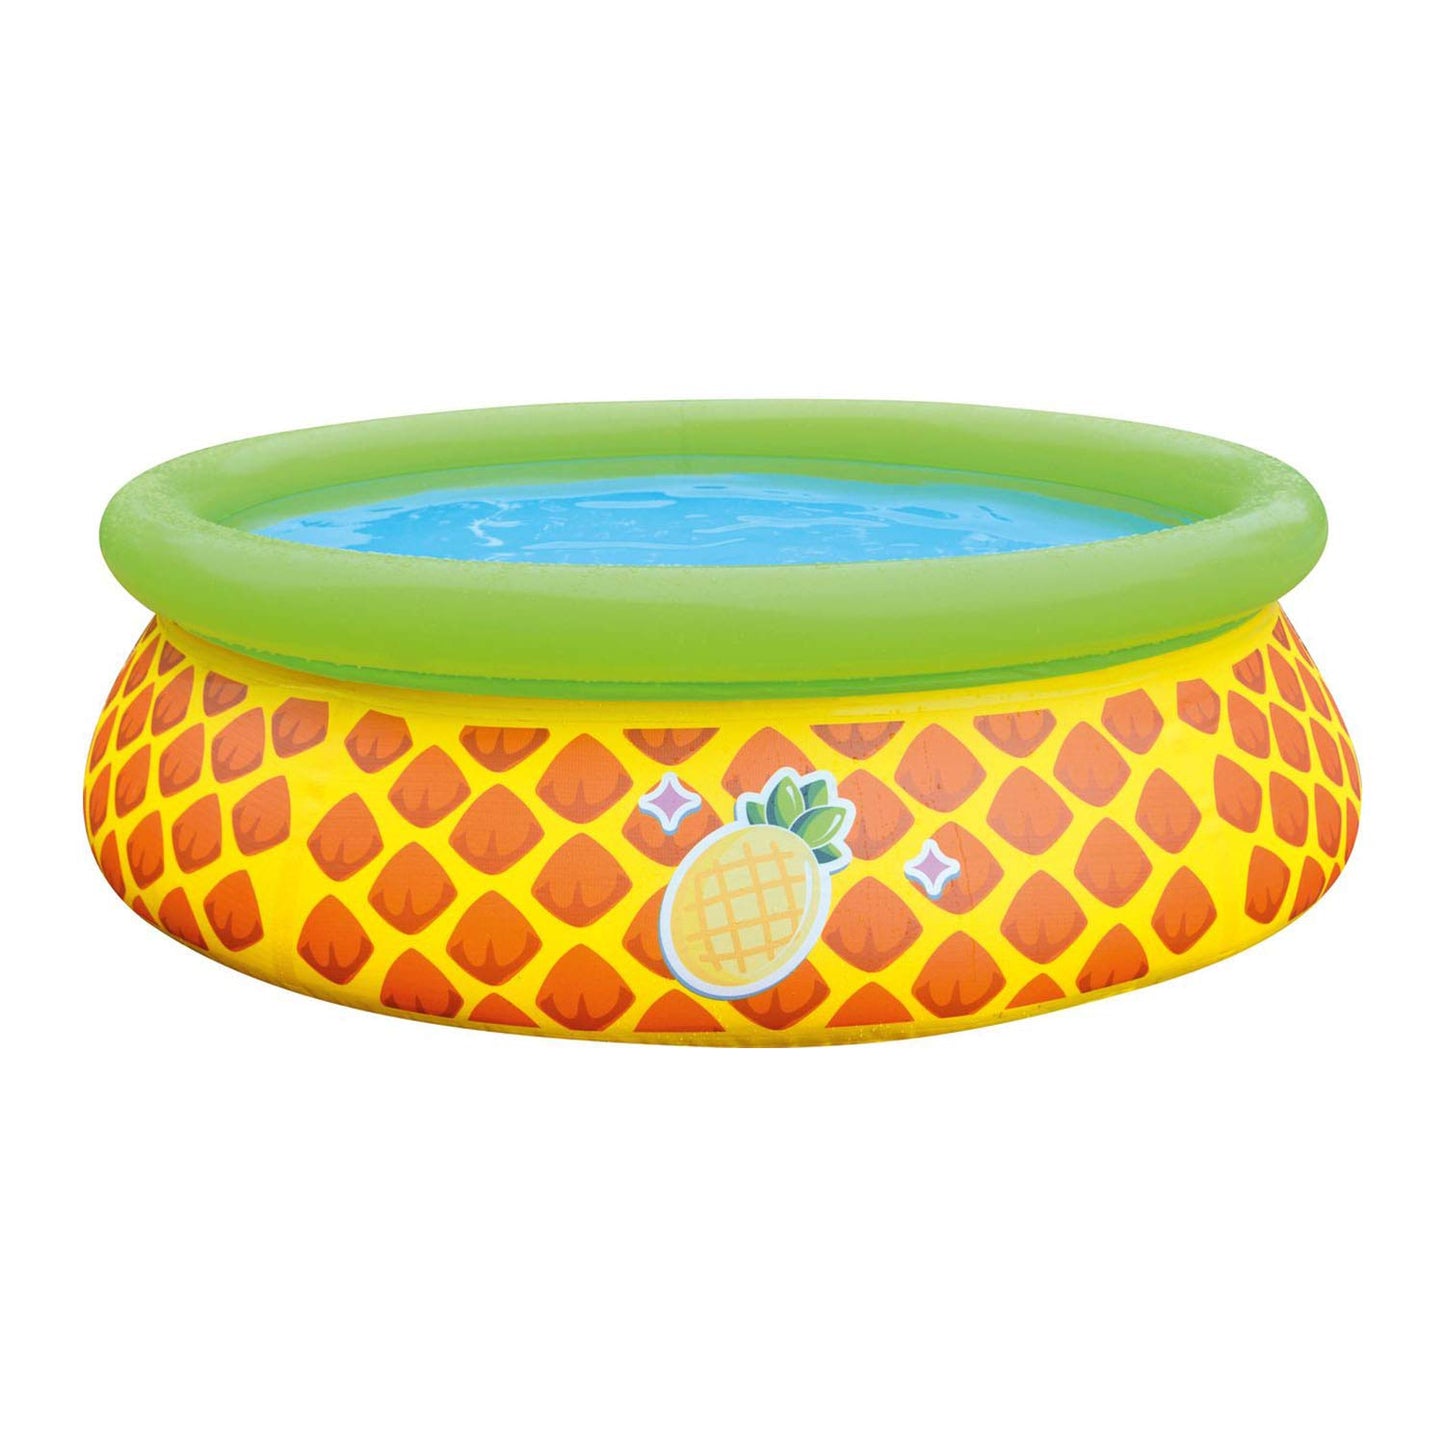 JLeisure Sun Club 17789 5 Foot x 16.5 Inch 1 to 2 Person Capacity Pineapple 3D Kids Above Ground Inflatable Outdoor Backyard Kiddie Swimming Pool